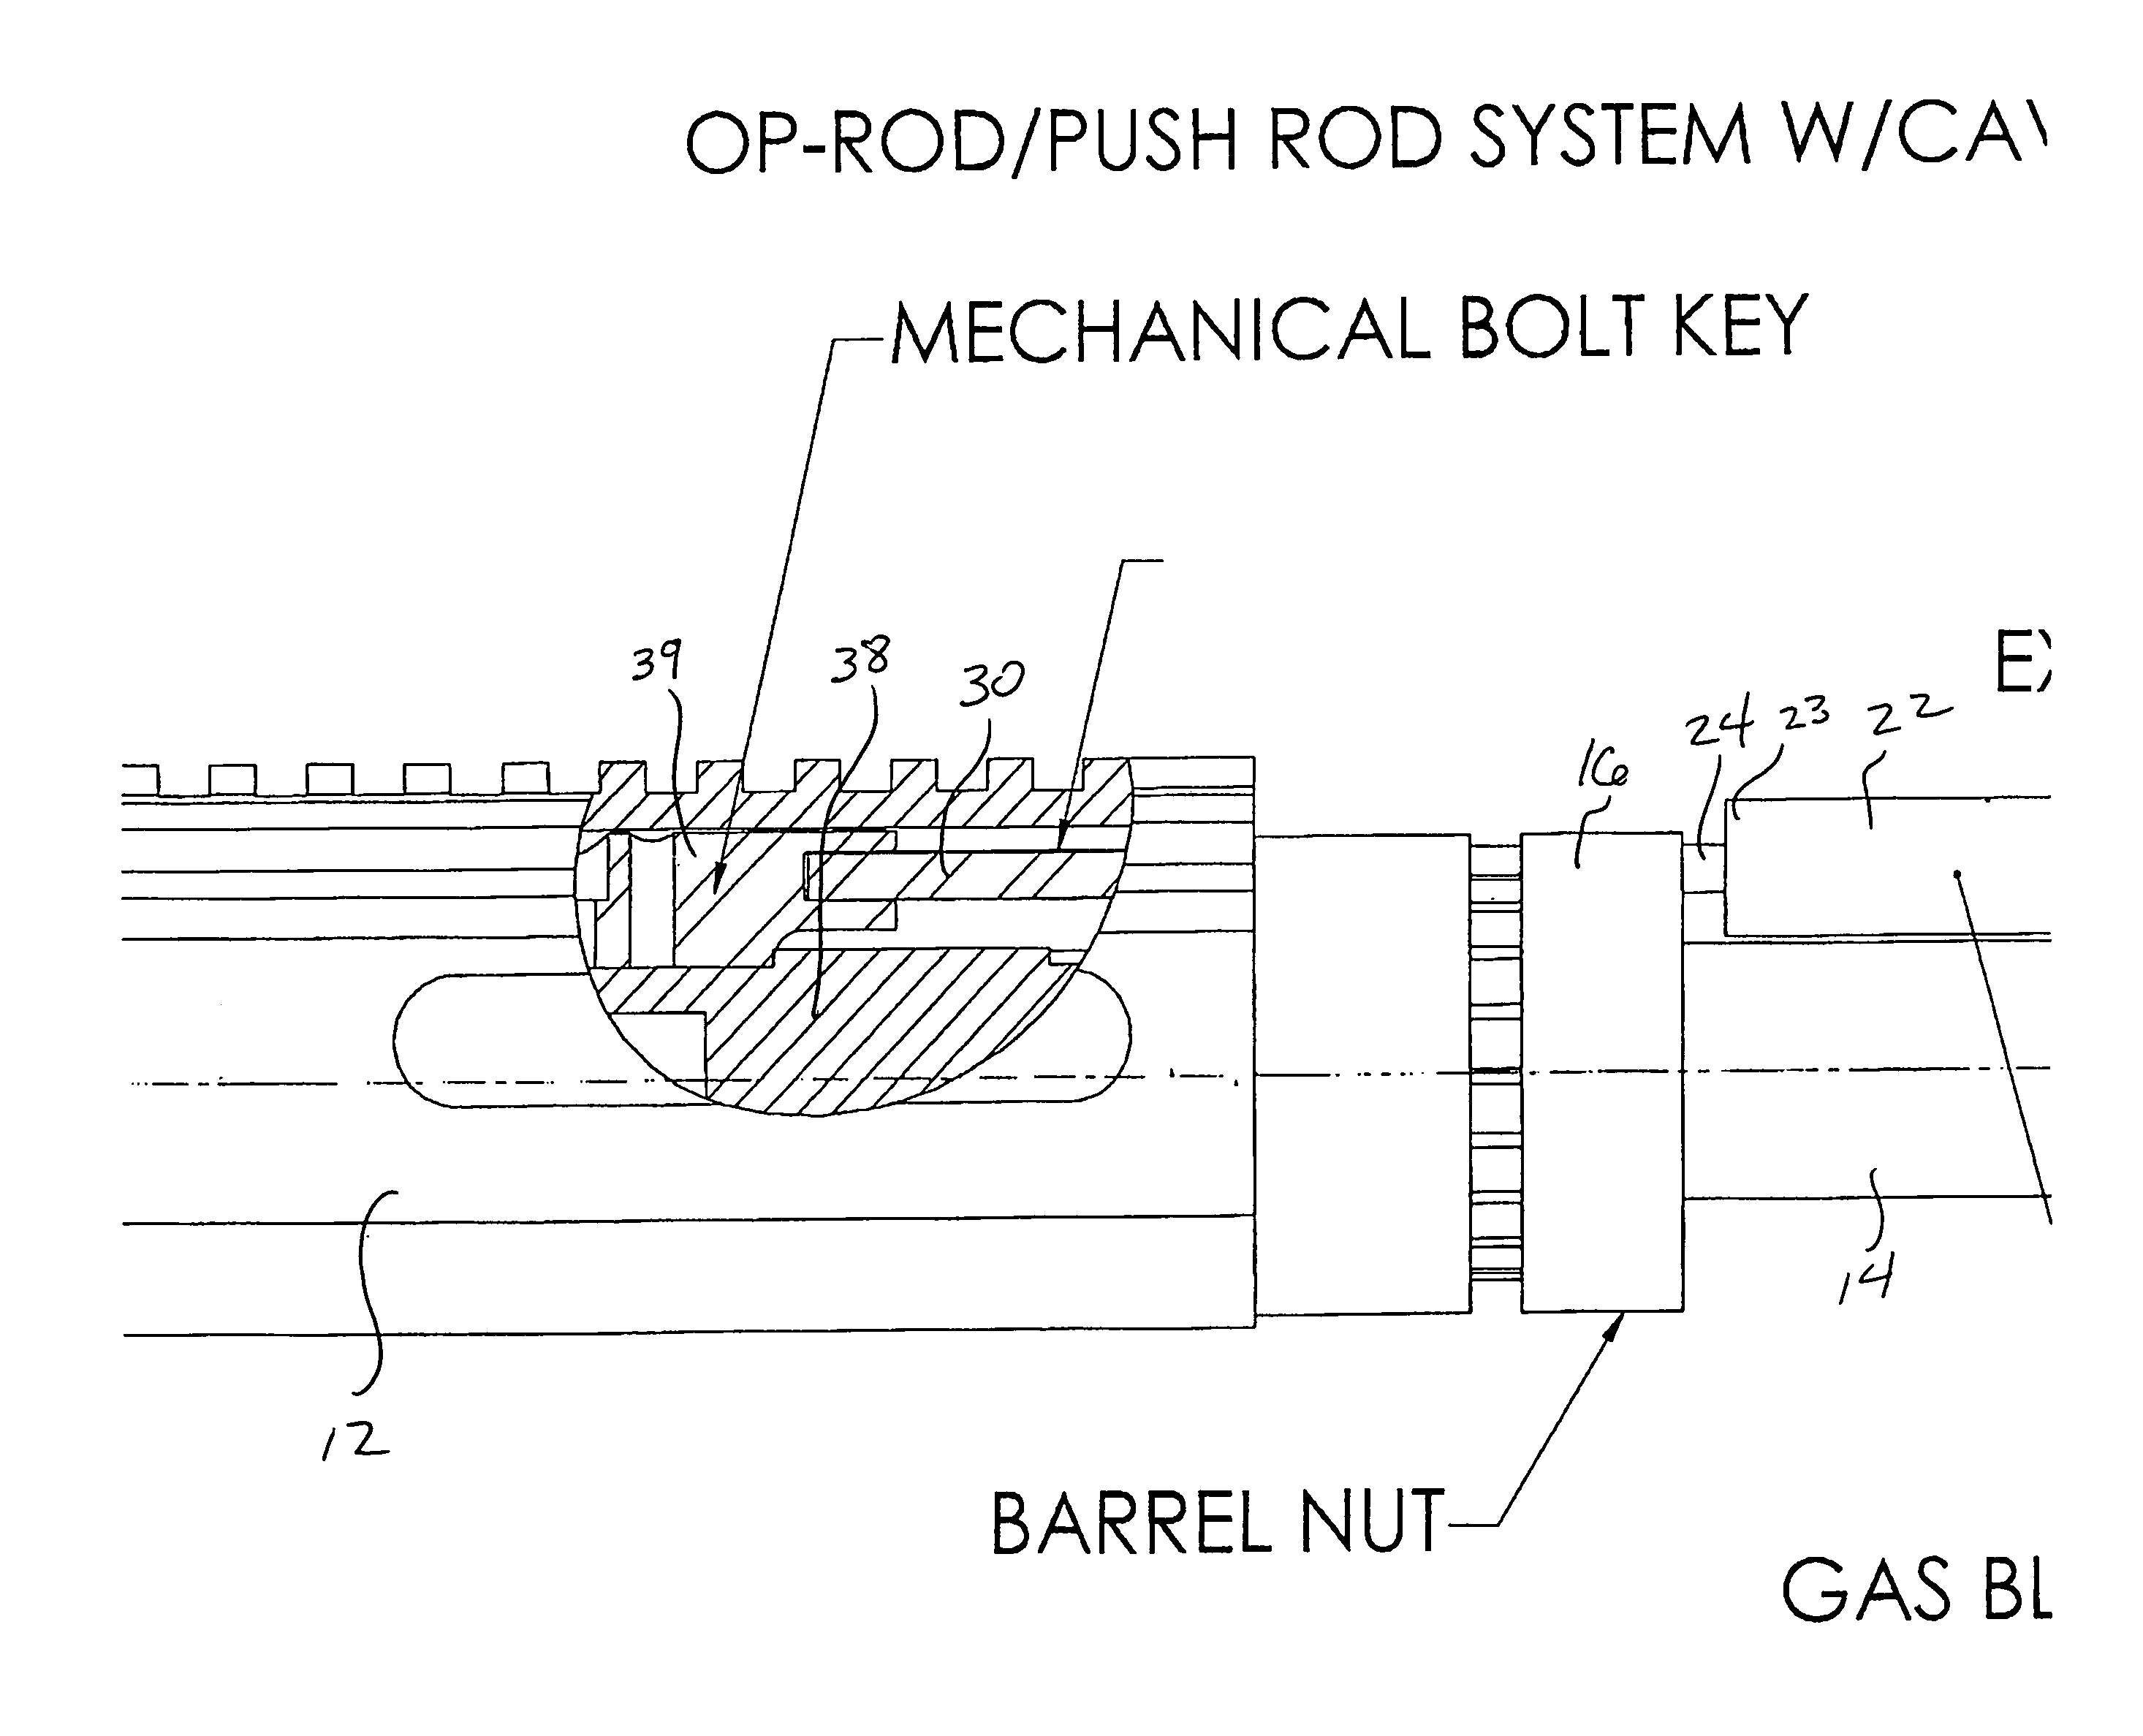 M16 modified with pushrod operating system and conversion method